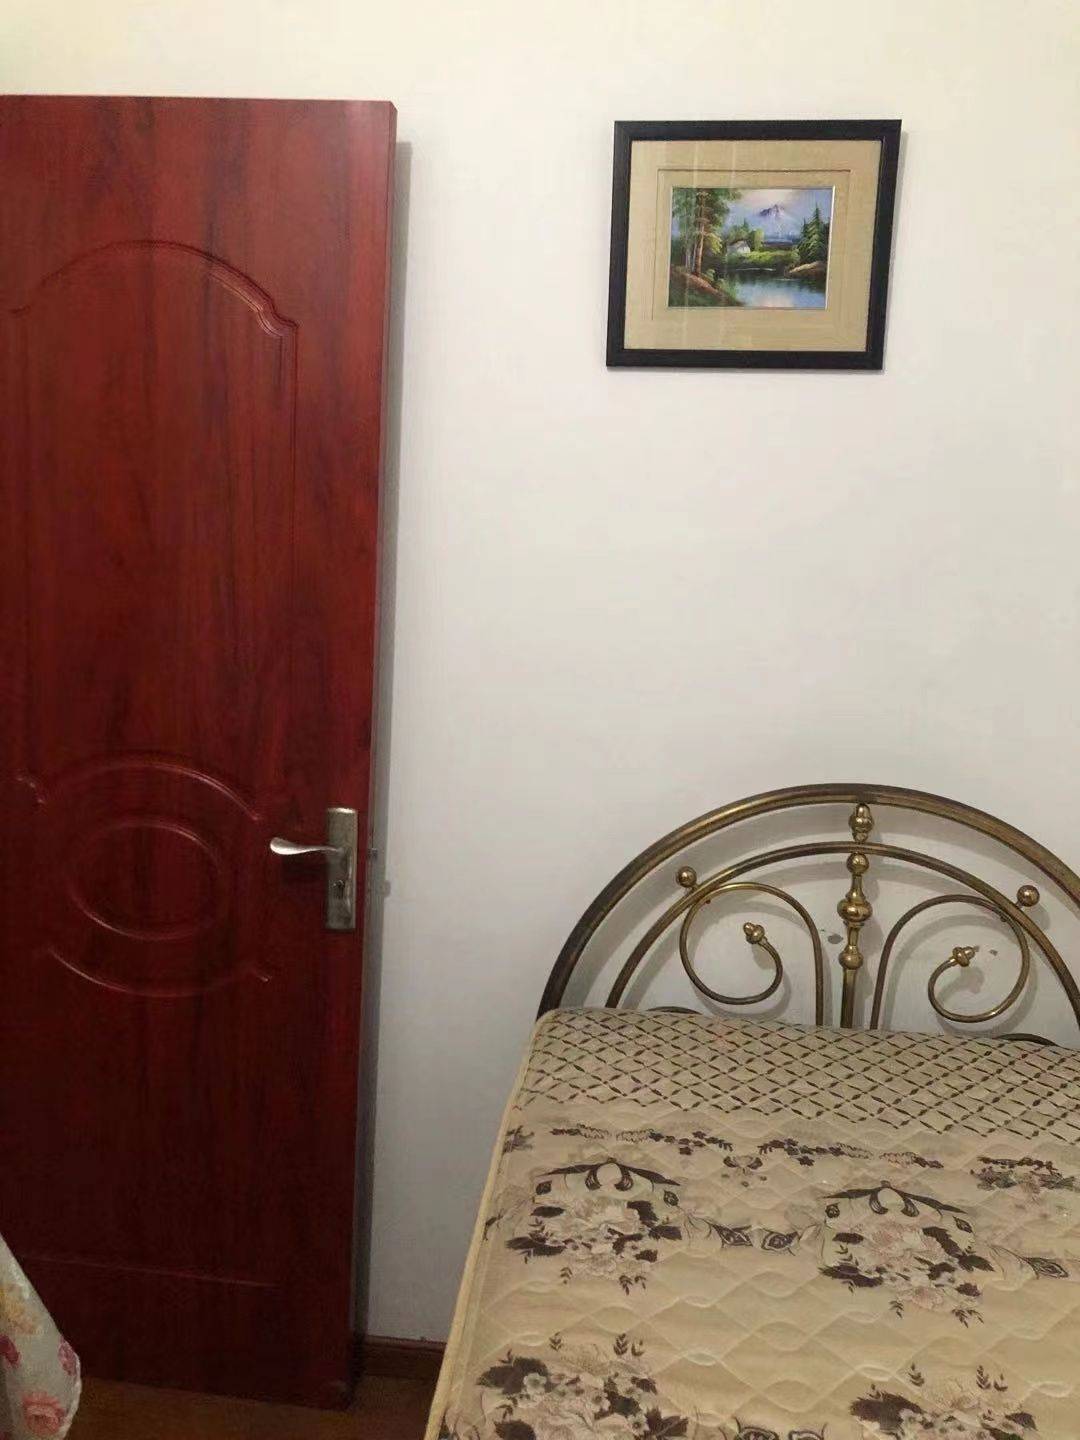 Nanjing-Yuhuatai-Cozy Home,Clean&Comfy,No Gender Limit,Chilled,Pet Friendly